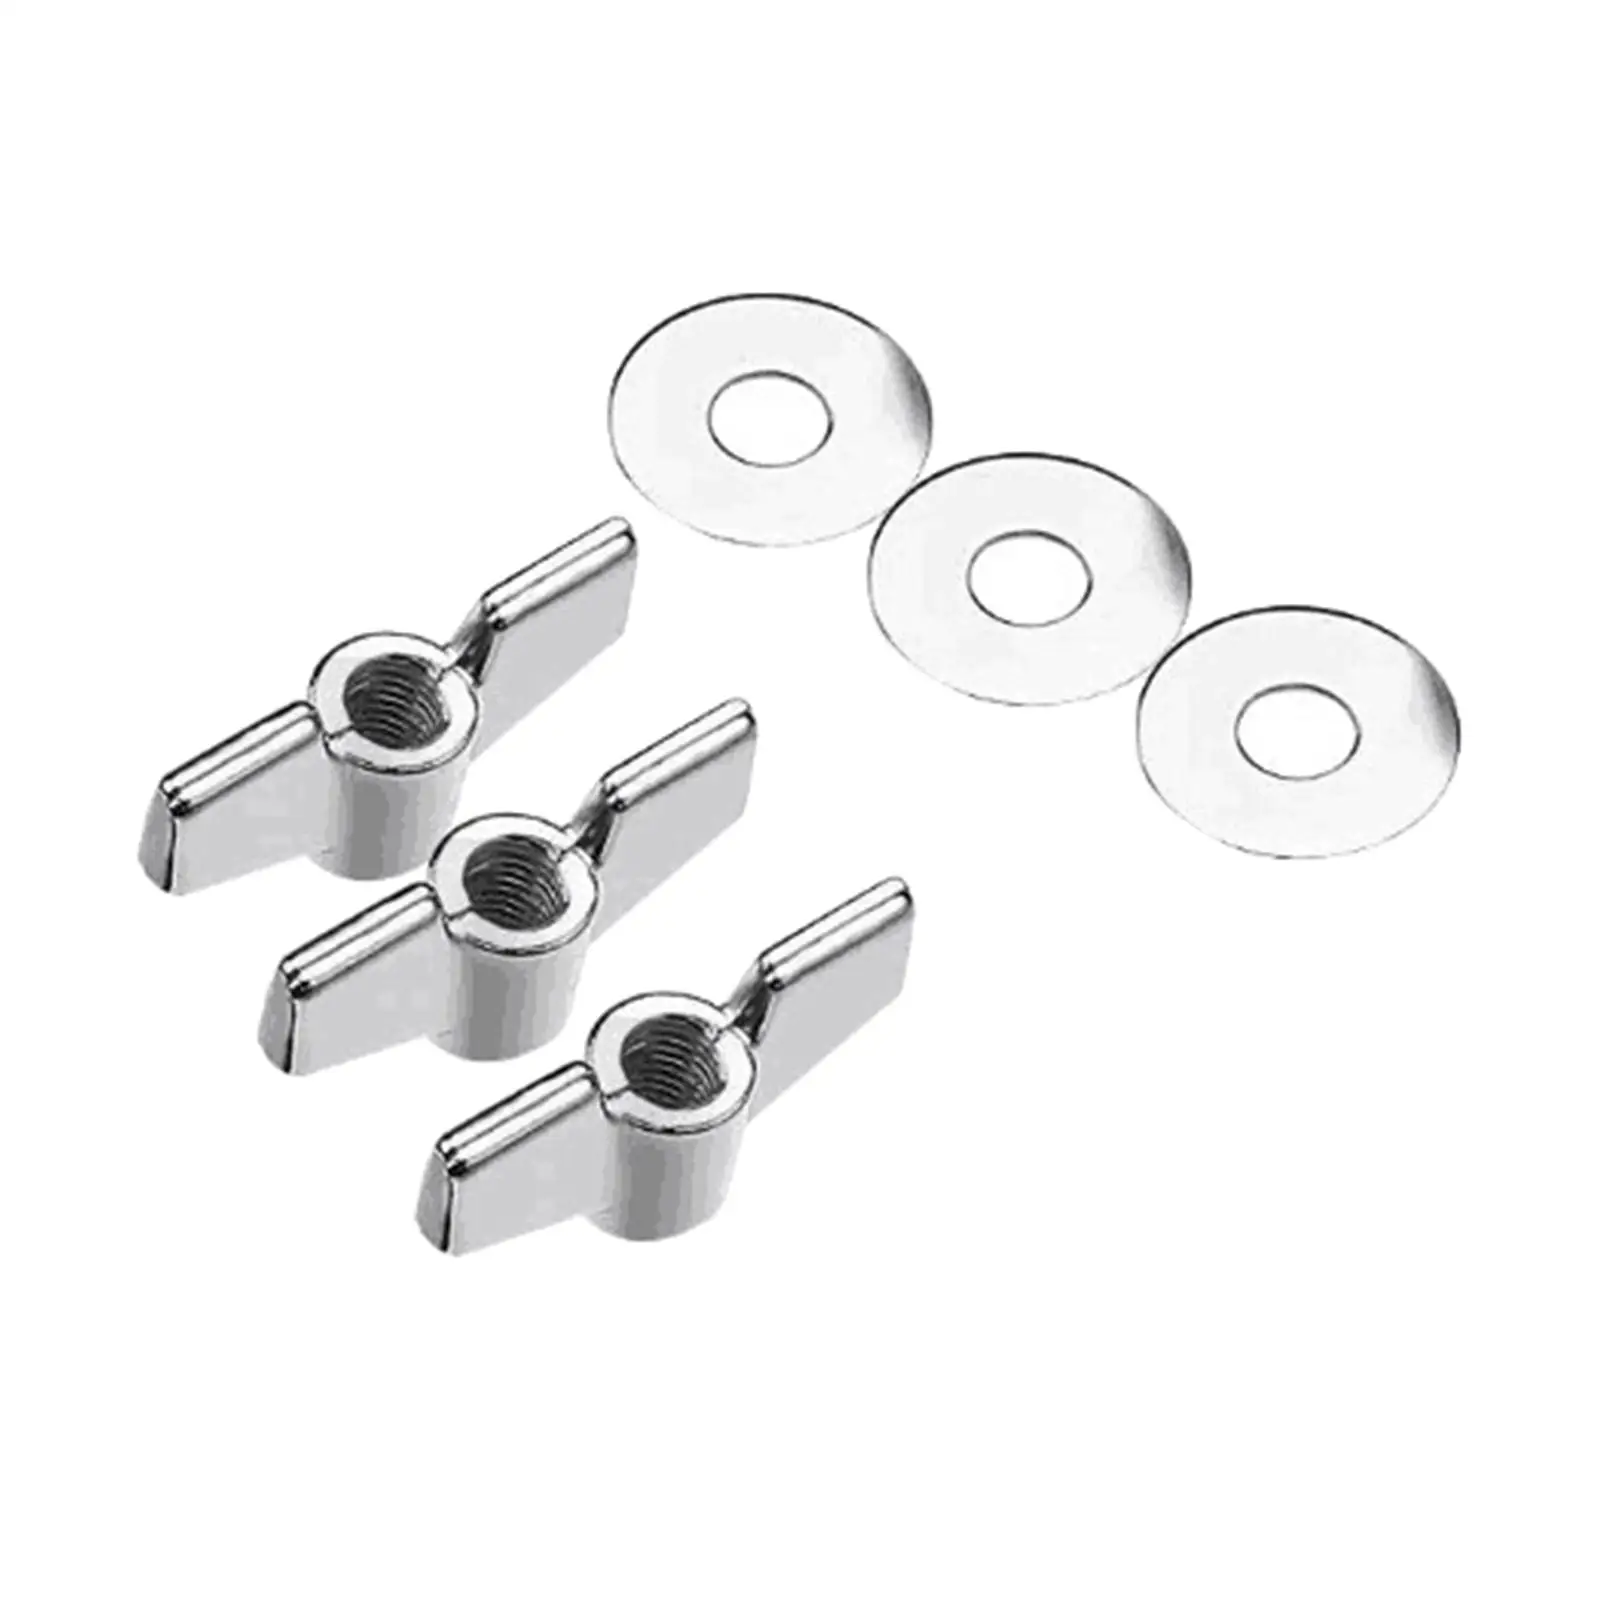 3Pcs Cymbal Wing Nuts with Washers Durable Metal Drum Accessory Heavy Duty Musical Instrument Parts Practice Cymbal Accessories